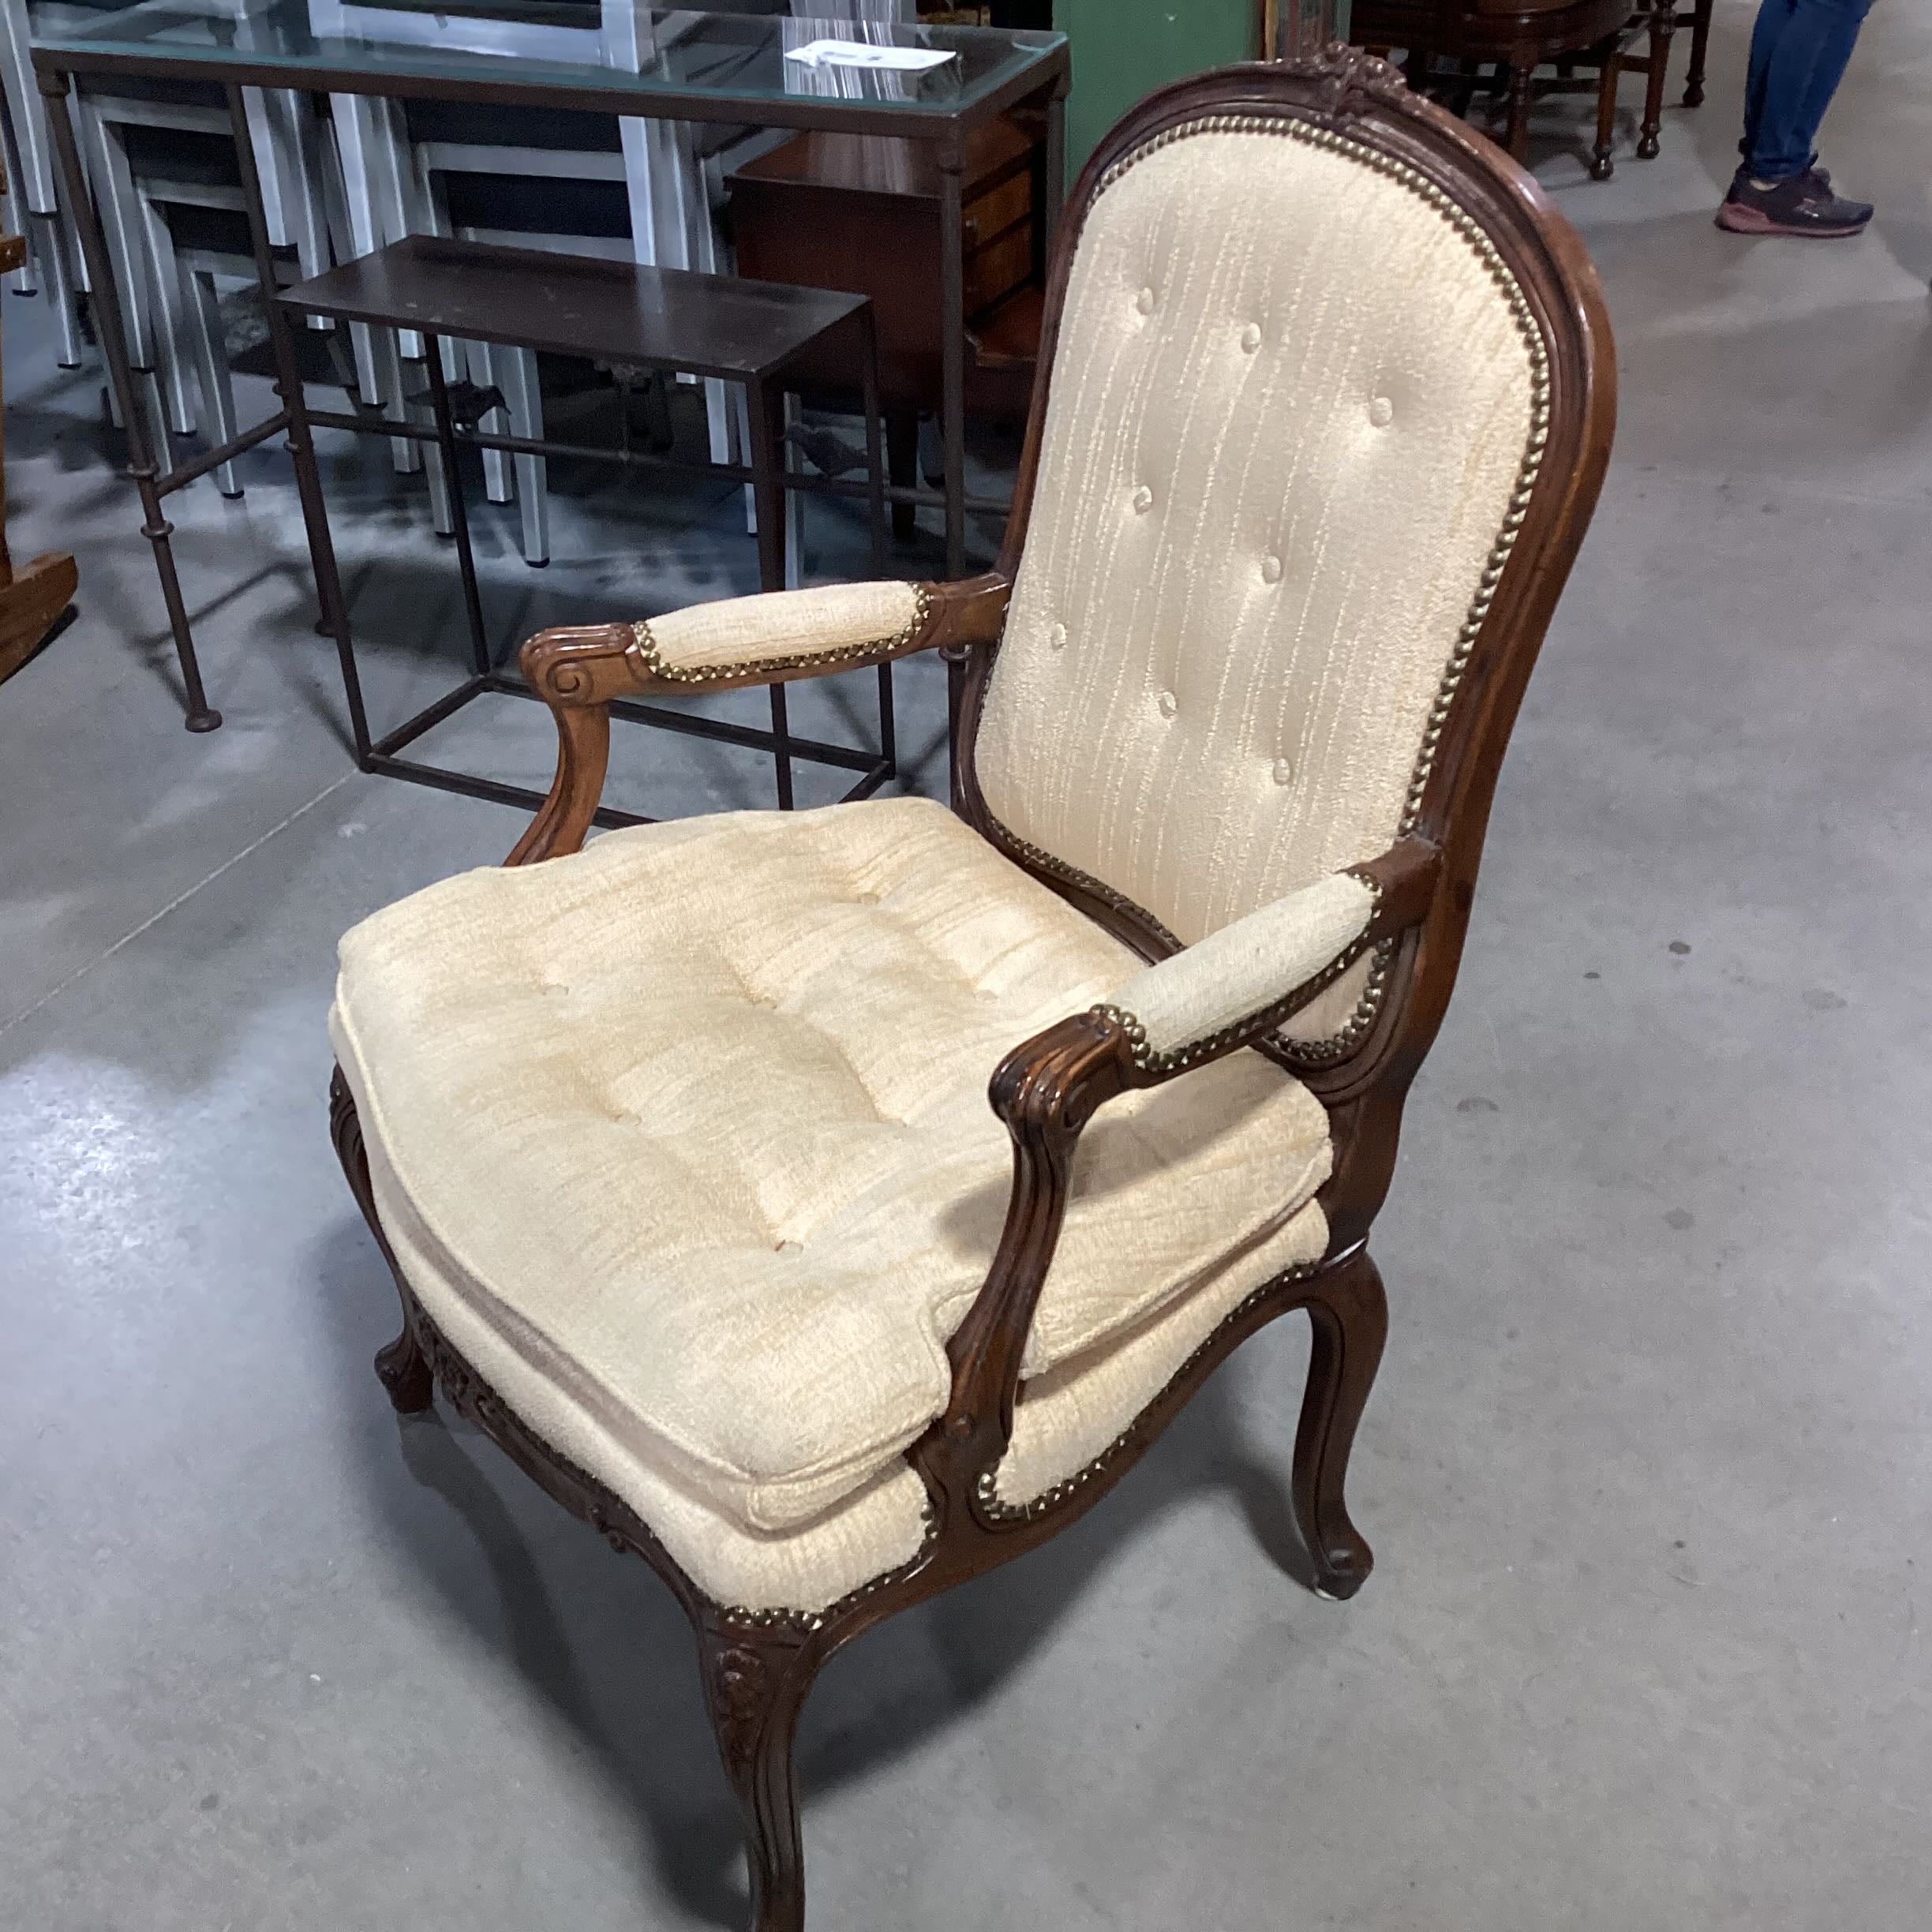 The Schoonbeck Co. Antique Carved Wood and Upholstered French Provincial Chair